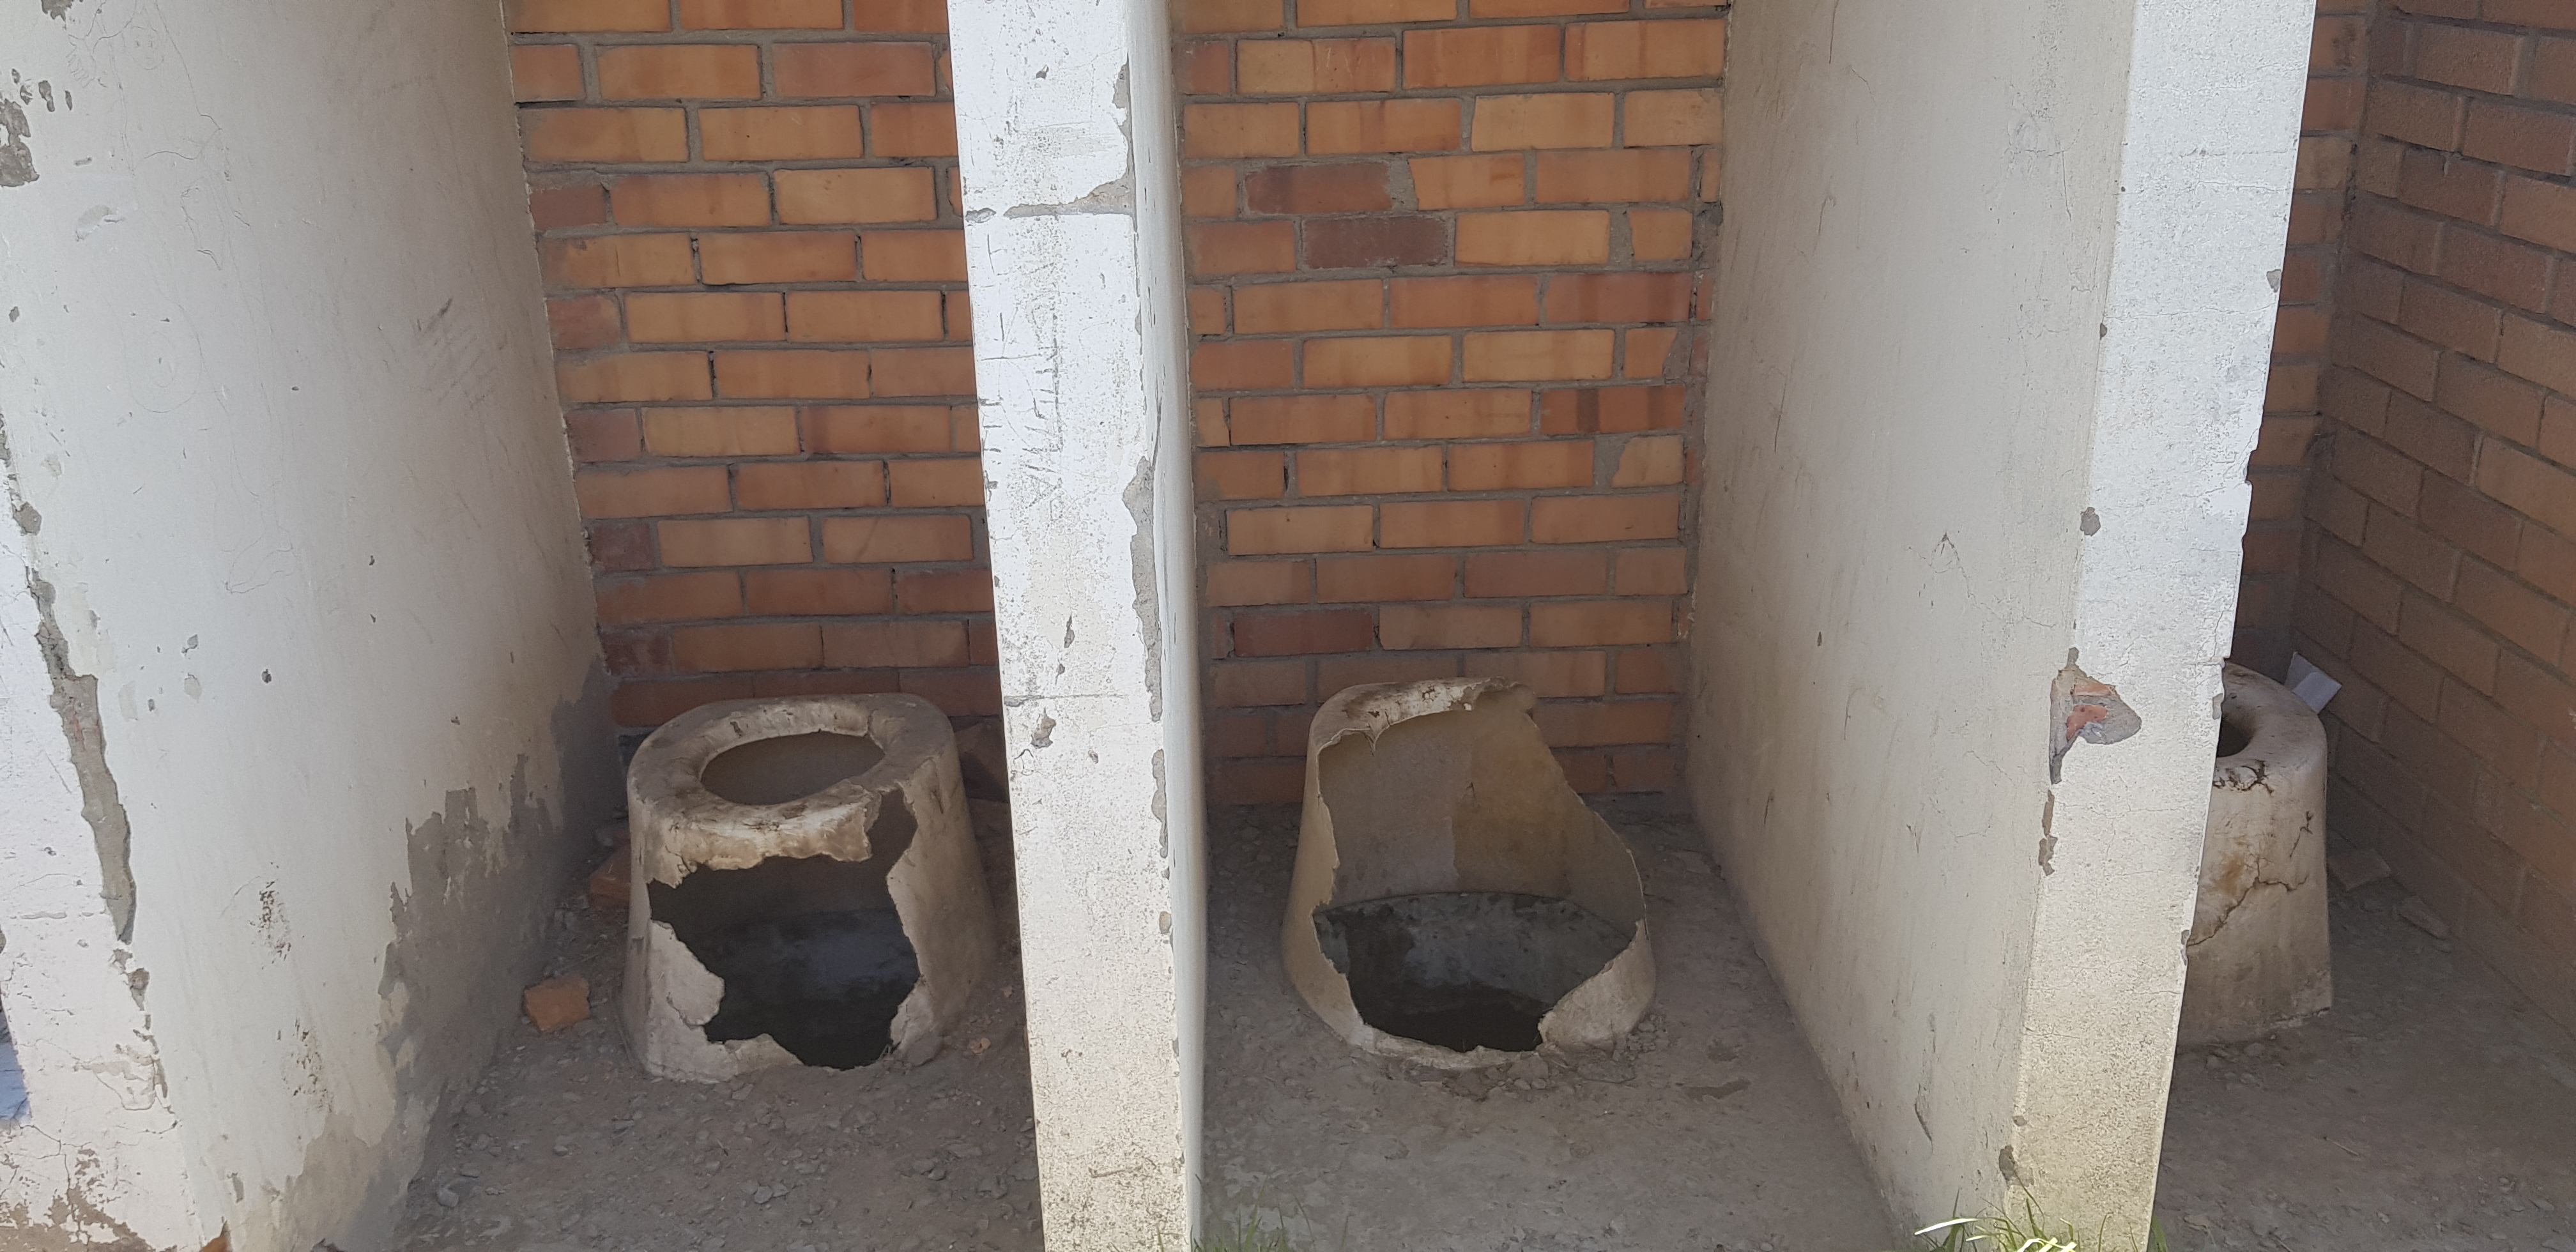 South Africa: Government must be held accountable for eradicating school pit toilets by the end of 2024